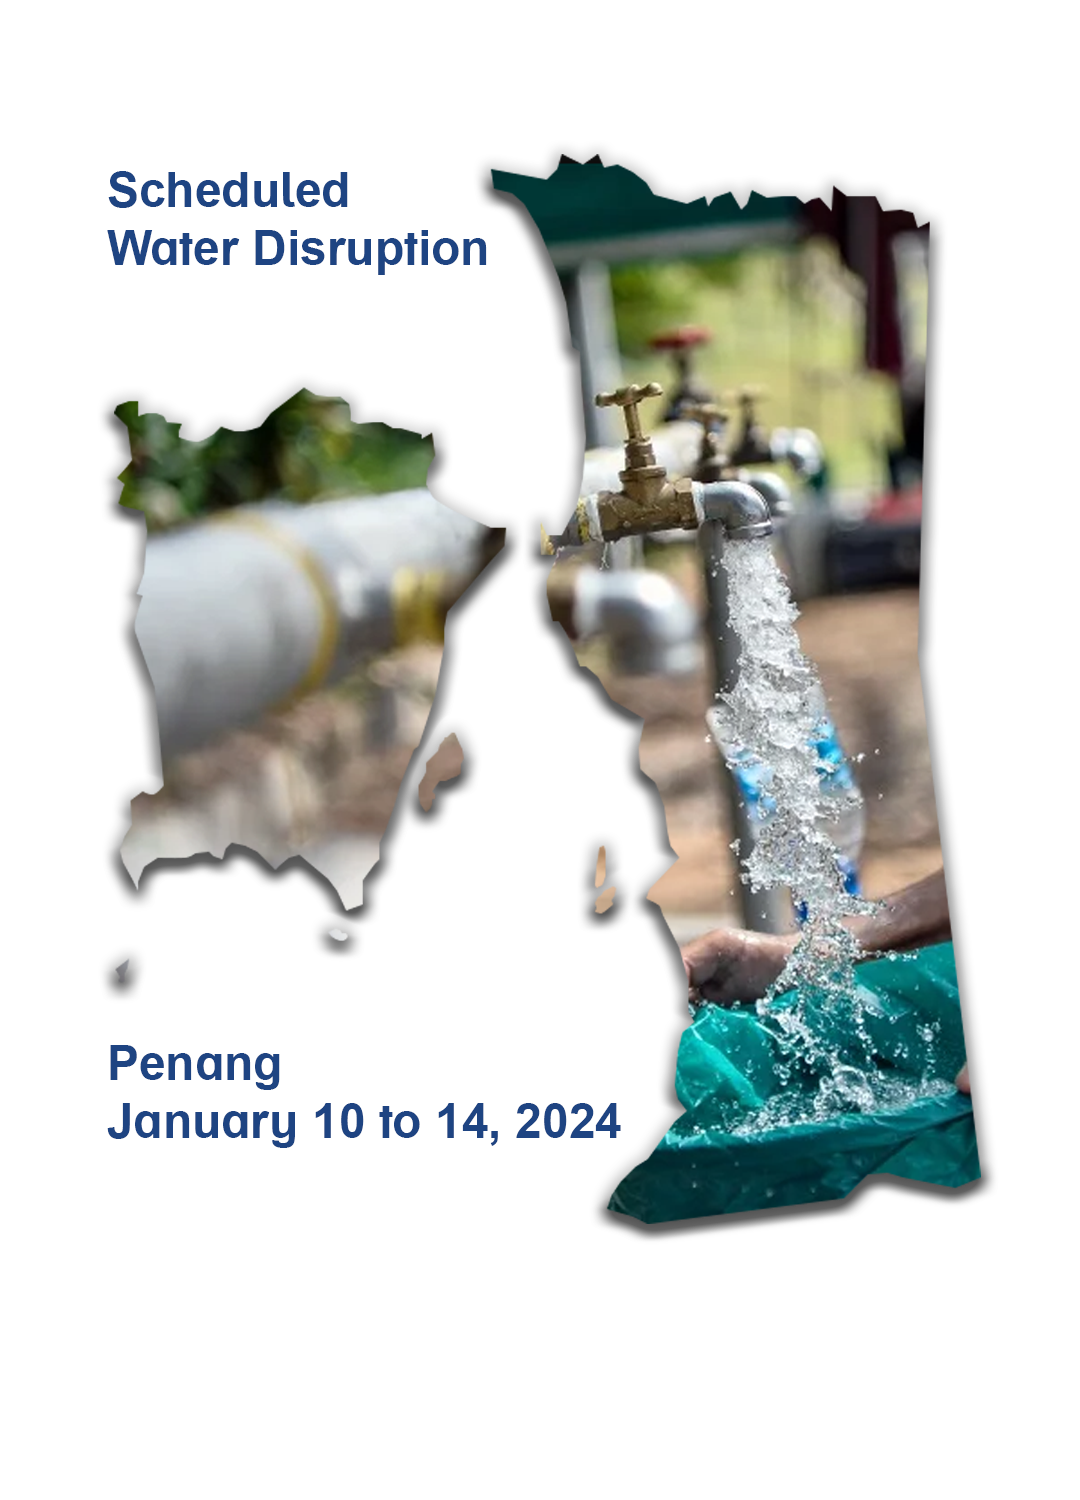 Scheduled Water Cut in Penang